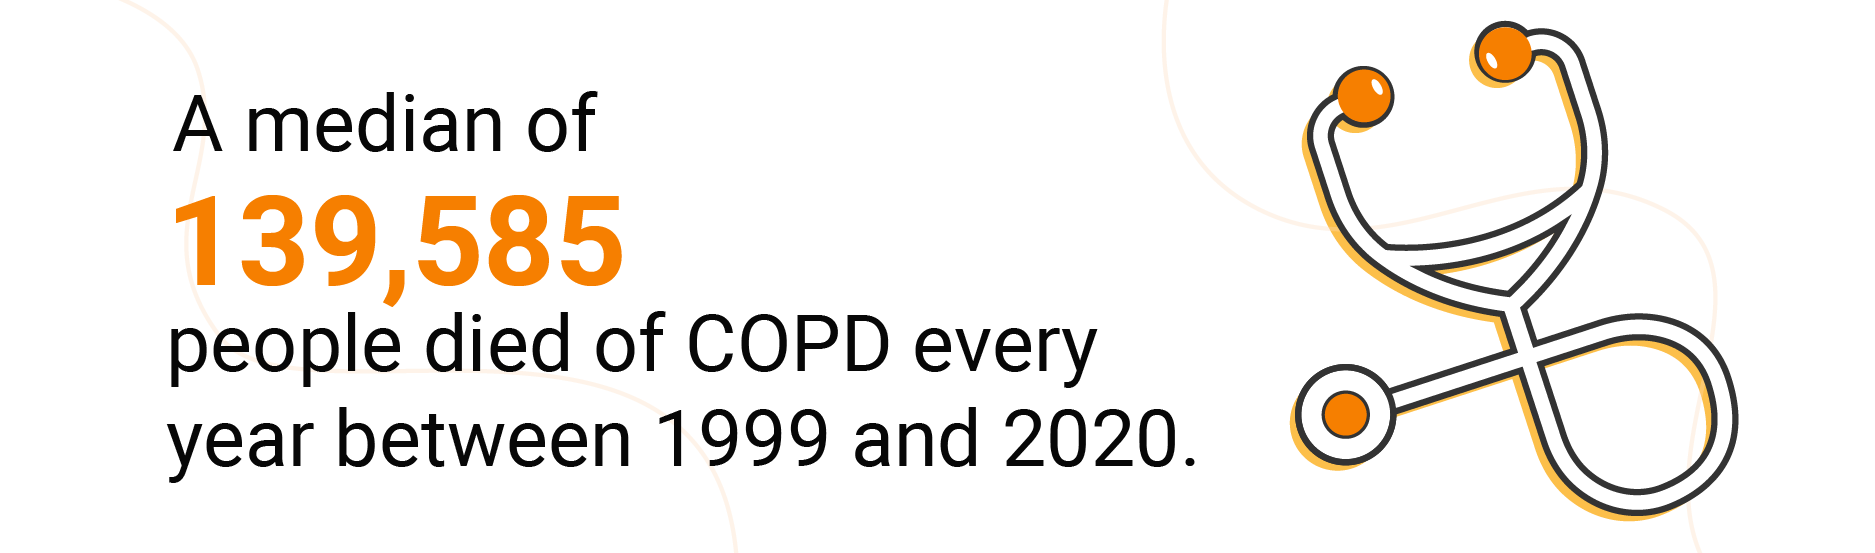 Call out text box saying 139,585 people died every year due to COPD between 1999 and 2020. 